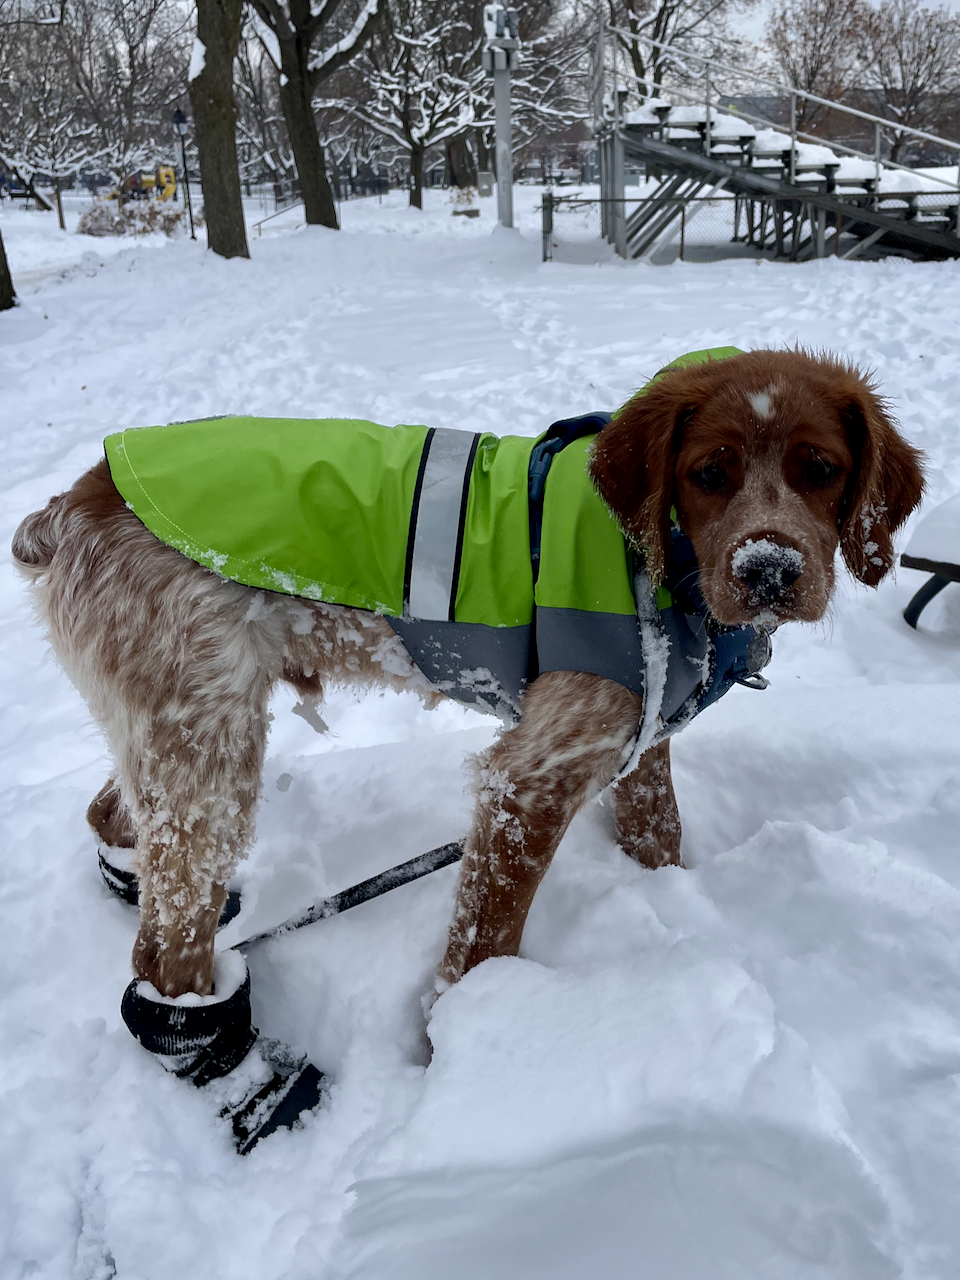 A brittany spaniel puppy wearing a green coat and standing in ankle-deep snow.